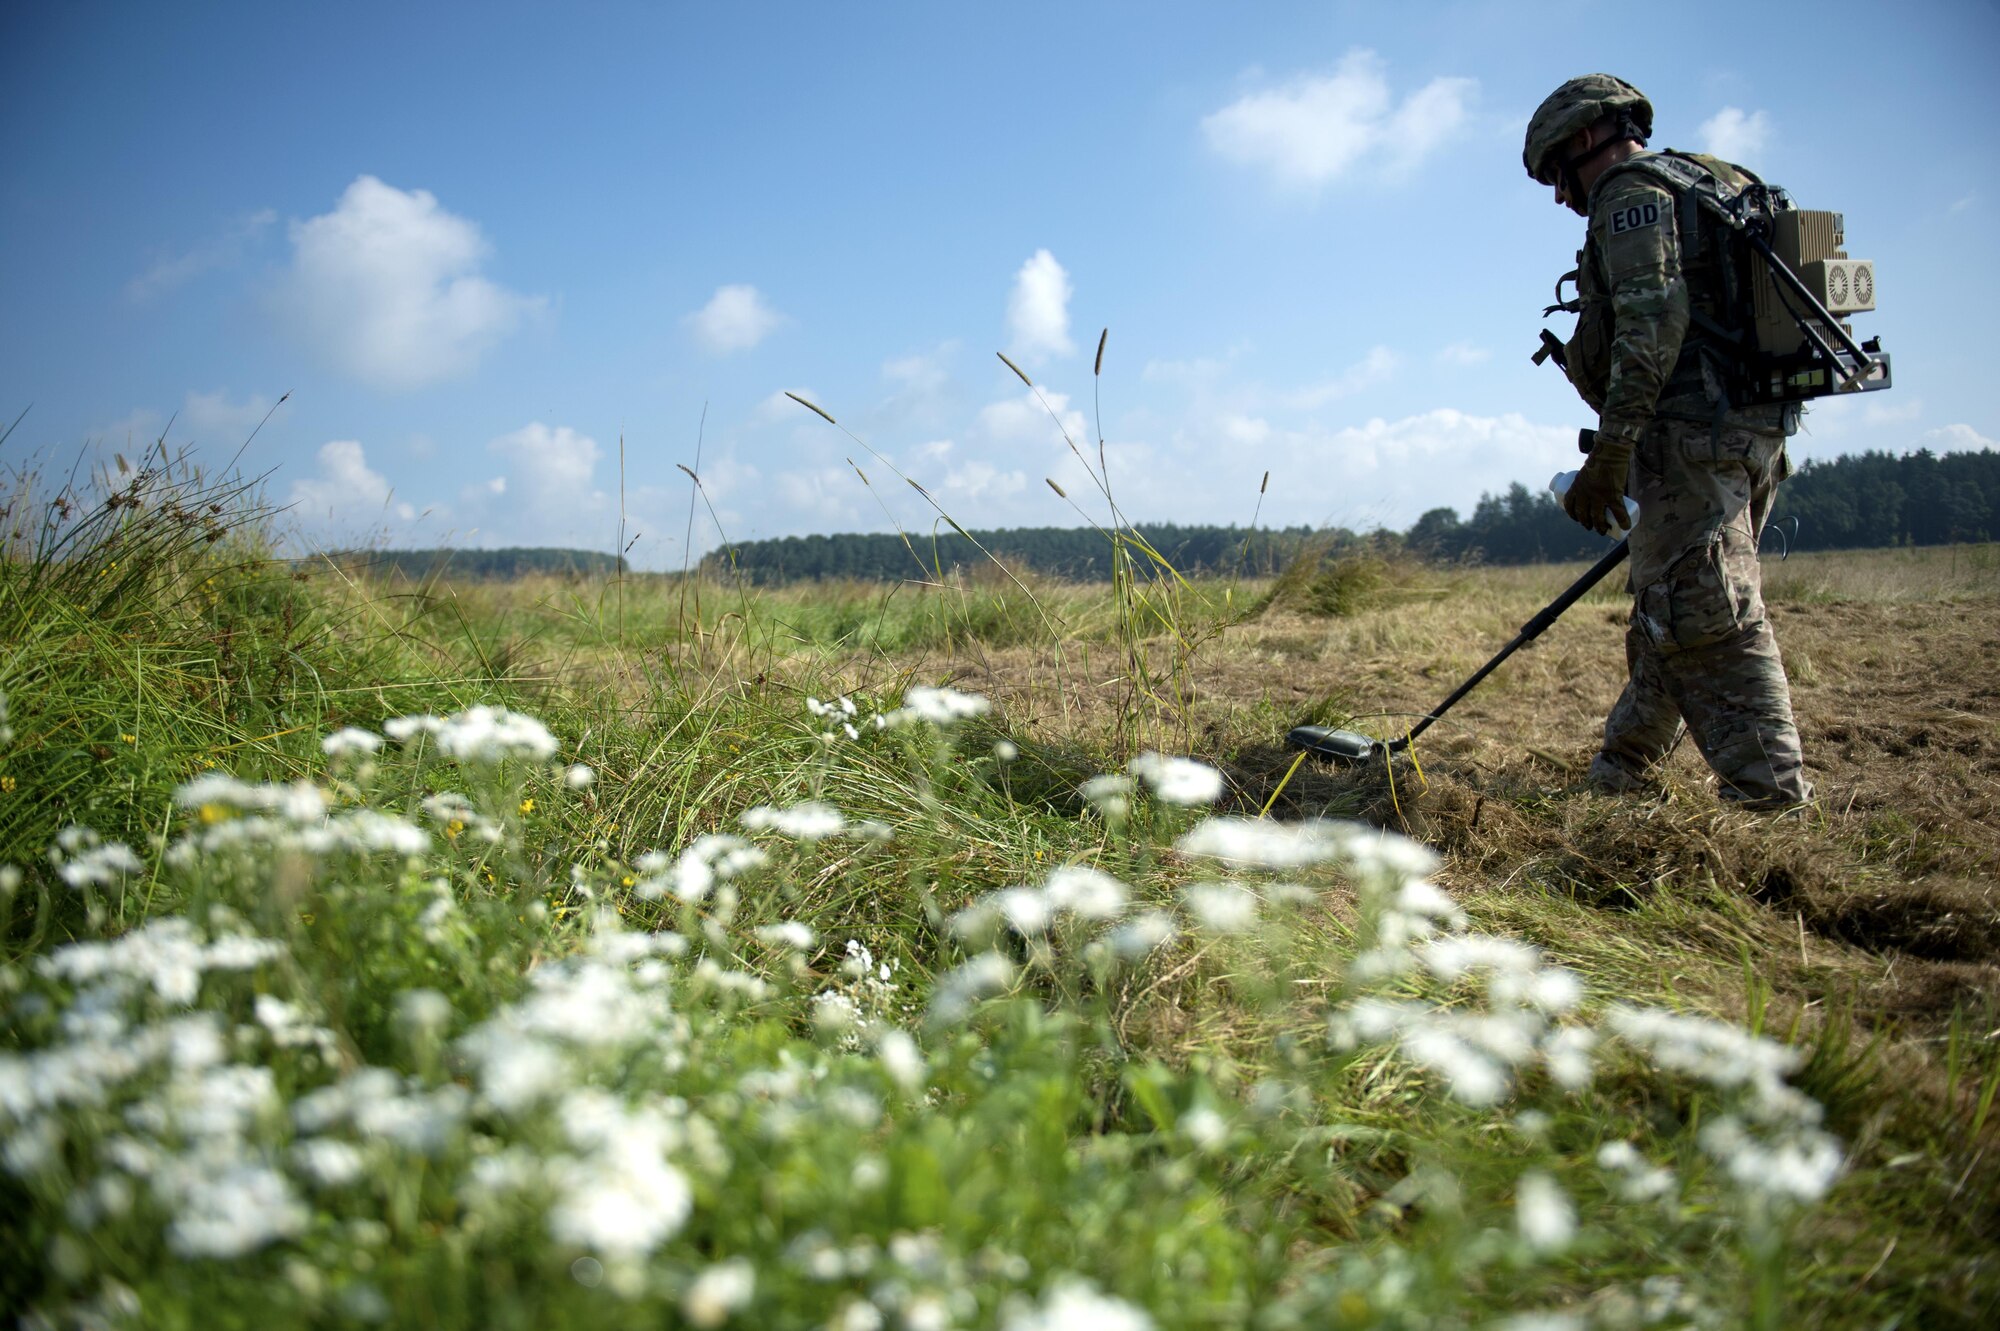 U.S. Air Force Tech. Sgt. Ryan Tennyson, 52nd Civil Engineer Squadron explosive ordnance disposal team leader, scans a field with a metal detector during an Improvised Explosive Device Rodeo at Spangdahlem Air Base, Germany, July 27, 2016. The exercise, known as the IED Rodeo, represented the first of its kind at Spangdahlem and featured a multilateral event showcasing EOD members from different branches and nations, how they locate explosive devices and the steps they take to safely and effectively disarm them. (U.S. Air Force photo by Airman 1st Class Preston L. Cherry/Realeased)